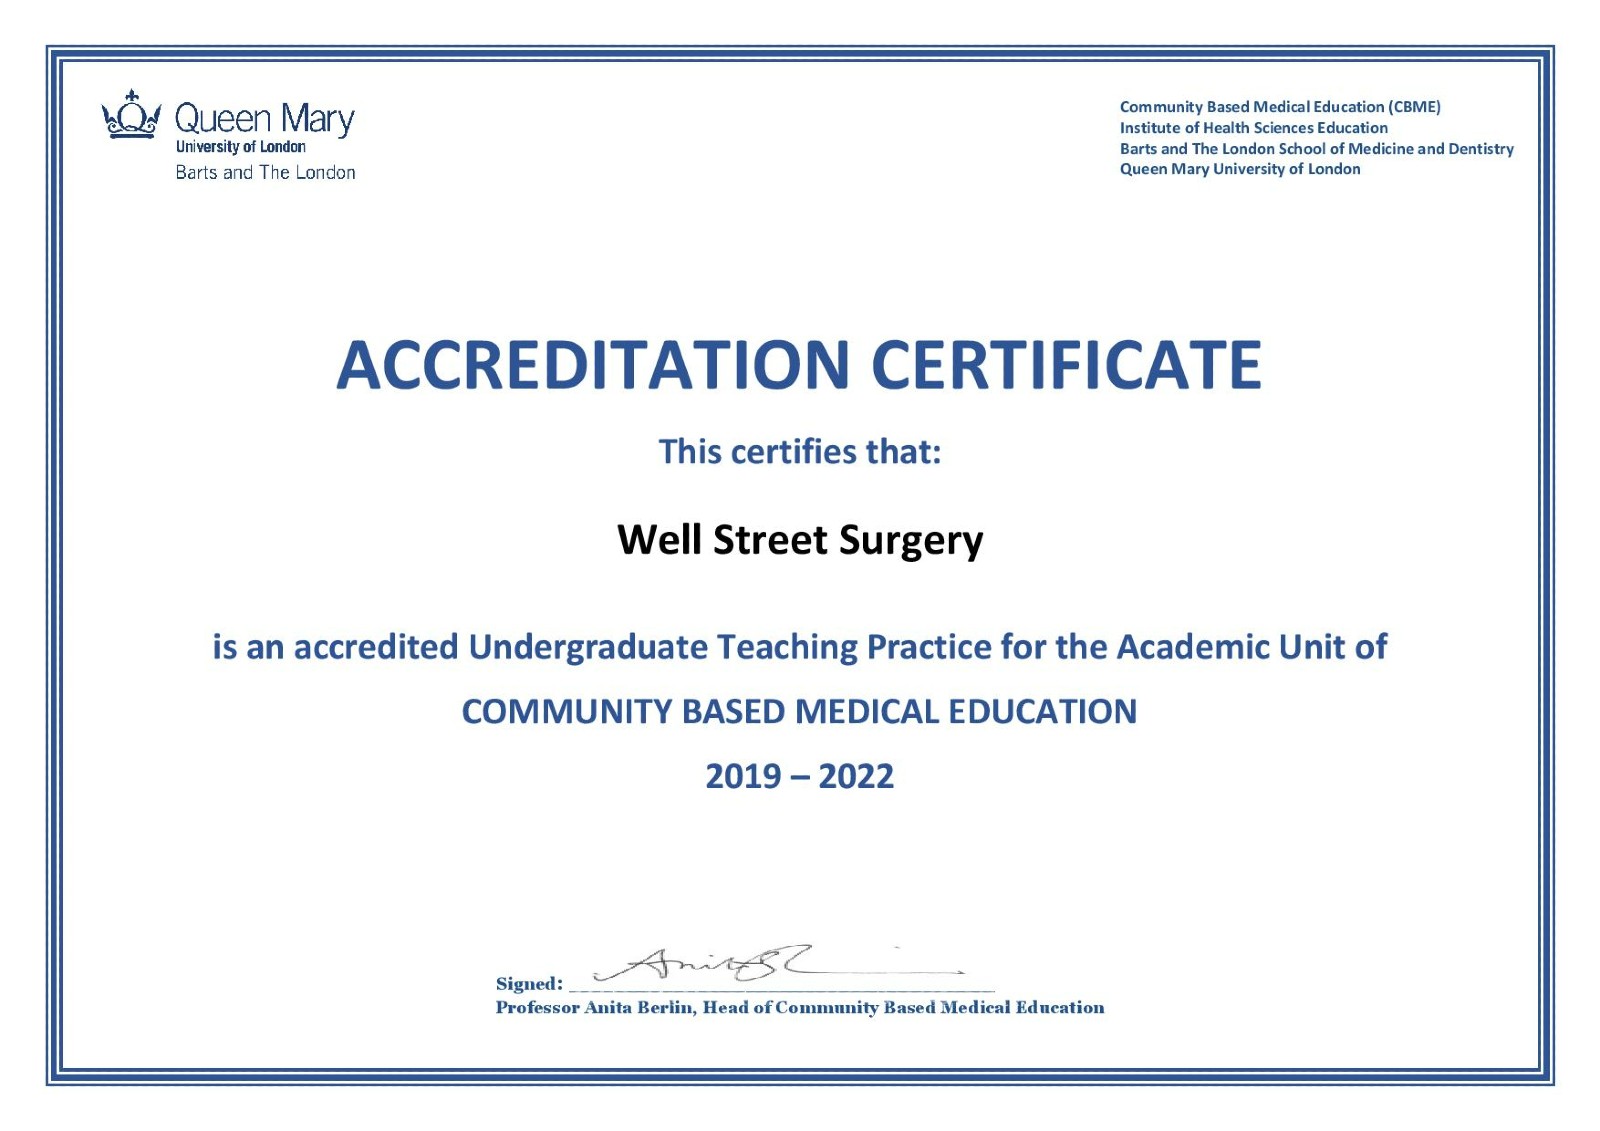 ACCREDITATION CERTIFICATE This certifies that: Well Street Surgery is an accredited Undergraduate Teaching Practice for the Academic Unit of COMMUNITY BASED MEDICAL EDUCATION 2019 – 2022